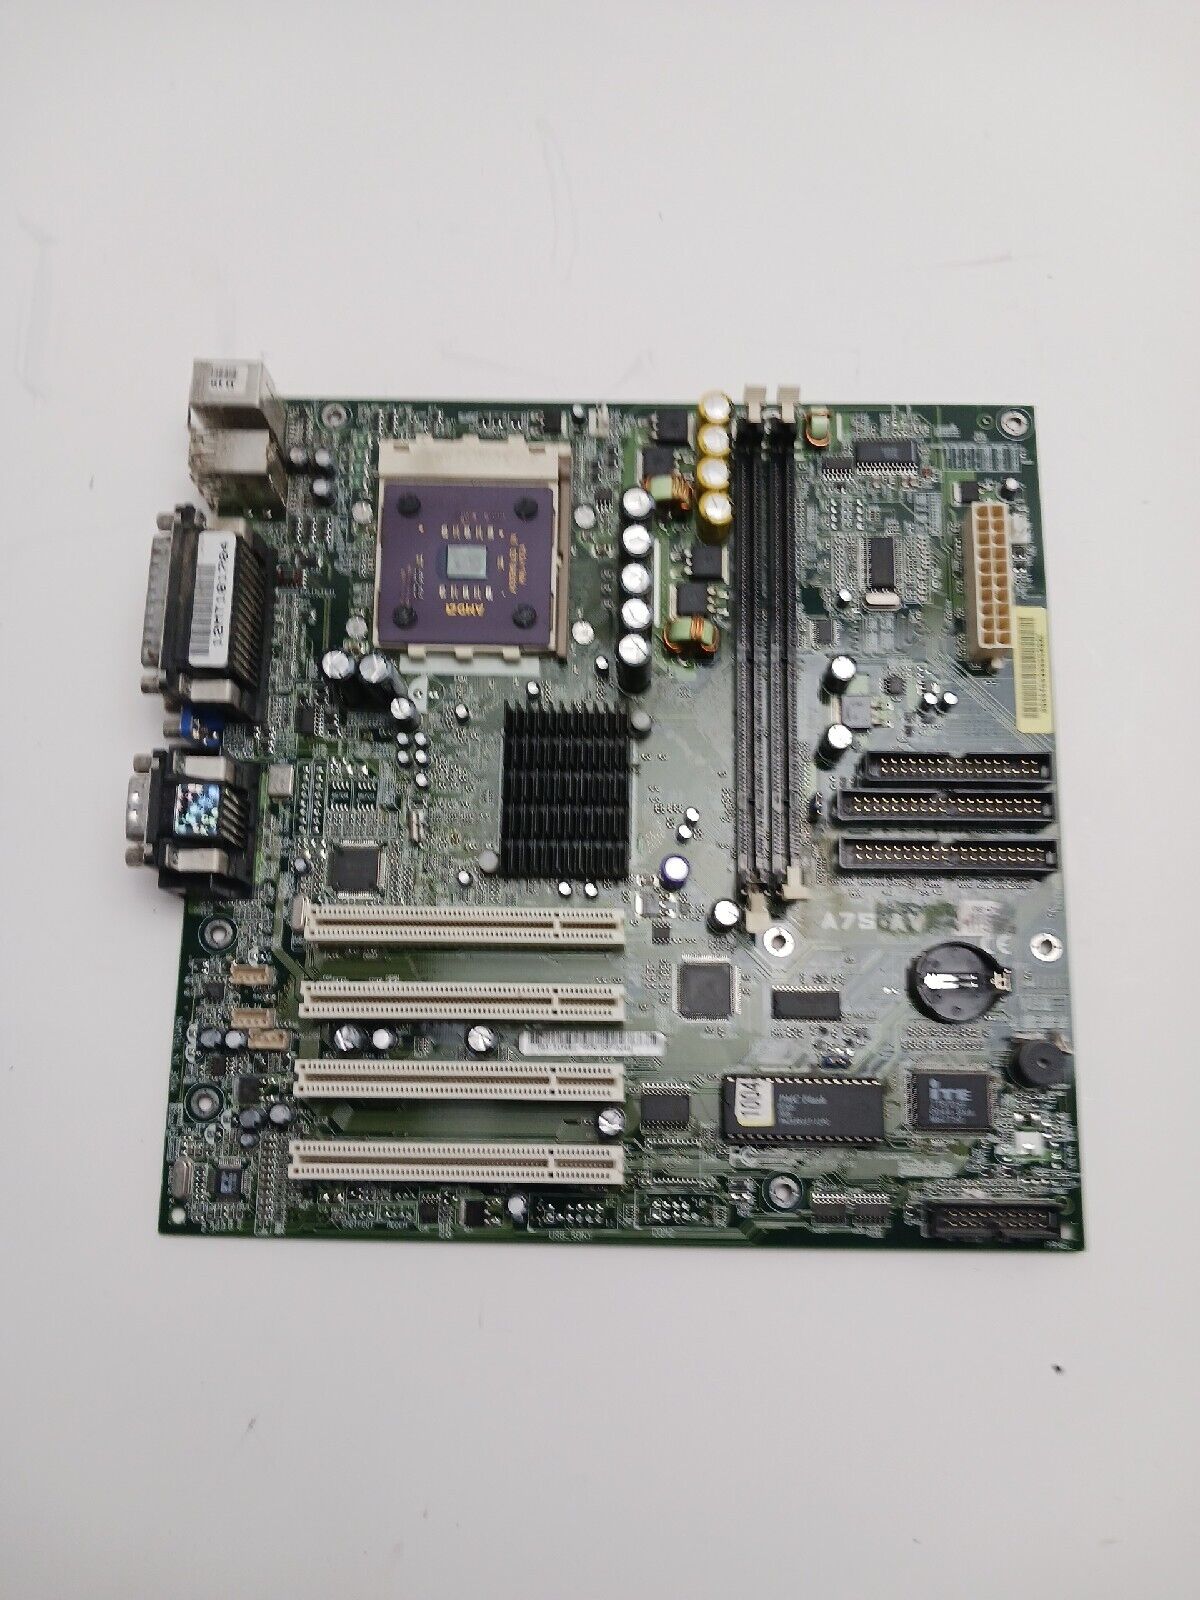 MB, Audio/Video, rev 1.06, (63-m4) Replacement Motherboard 